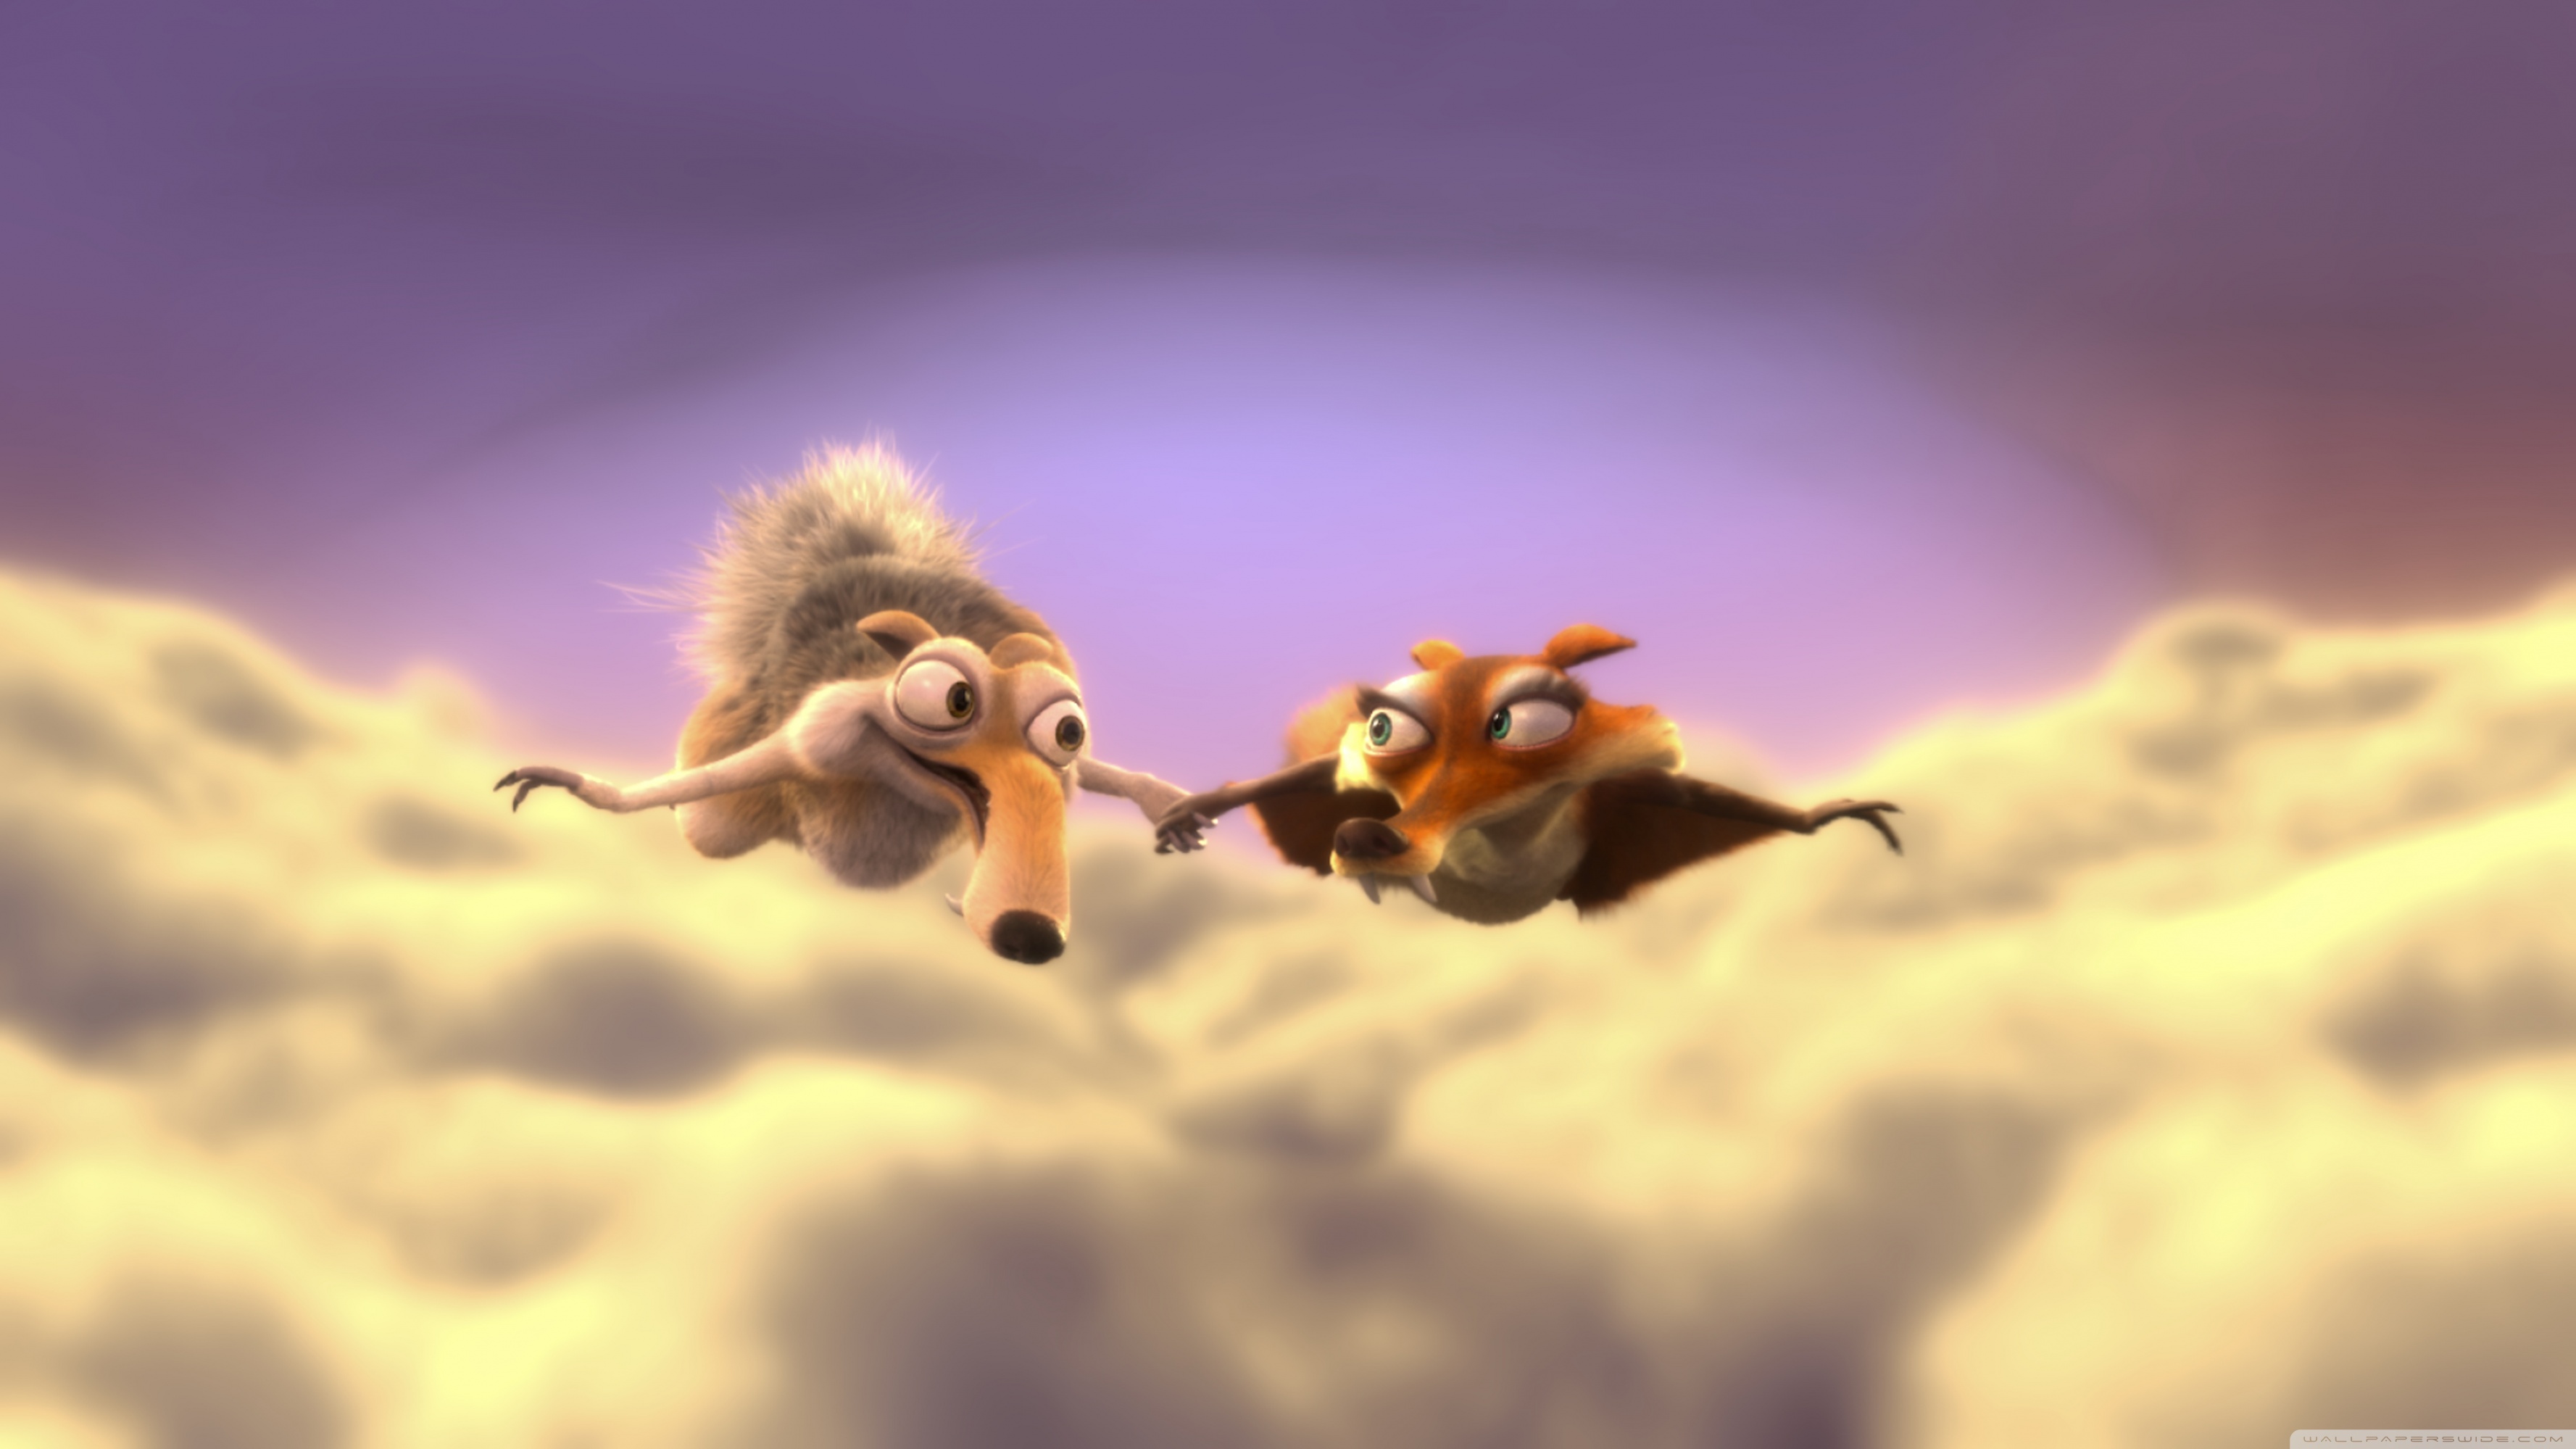 Ice Age 3 Dawn of the Dinosaurs – Scrat and Scratte